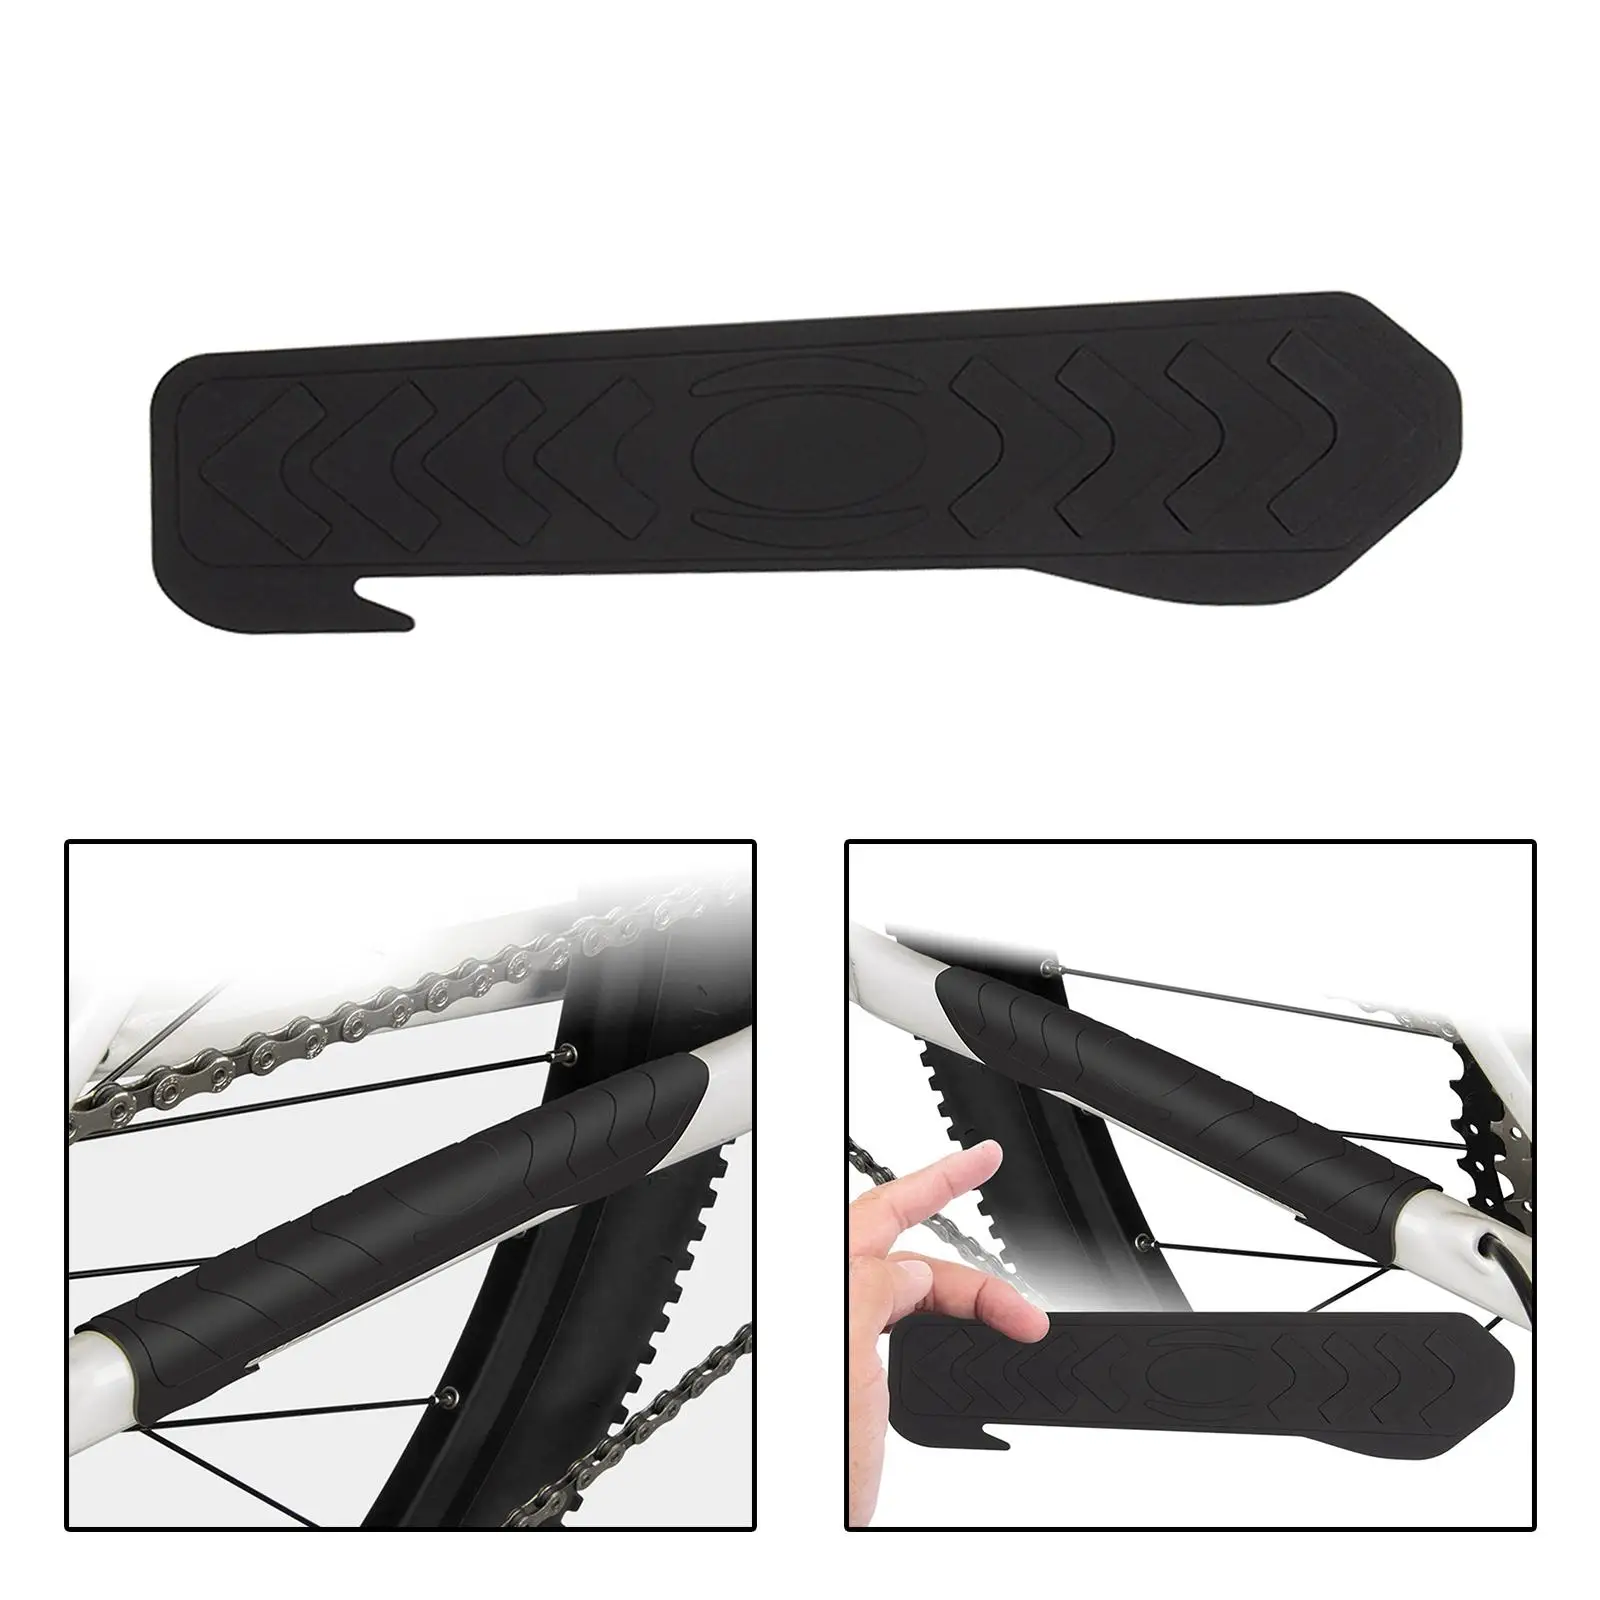 Bike Chainstay Protector Waterproof Scratch Resistant Silicone Bicycle Frame Guard Chain Stay Pad Sticker for Mountain Bikes